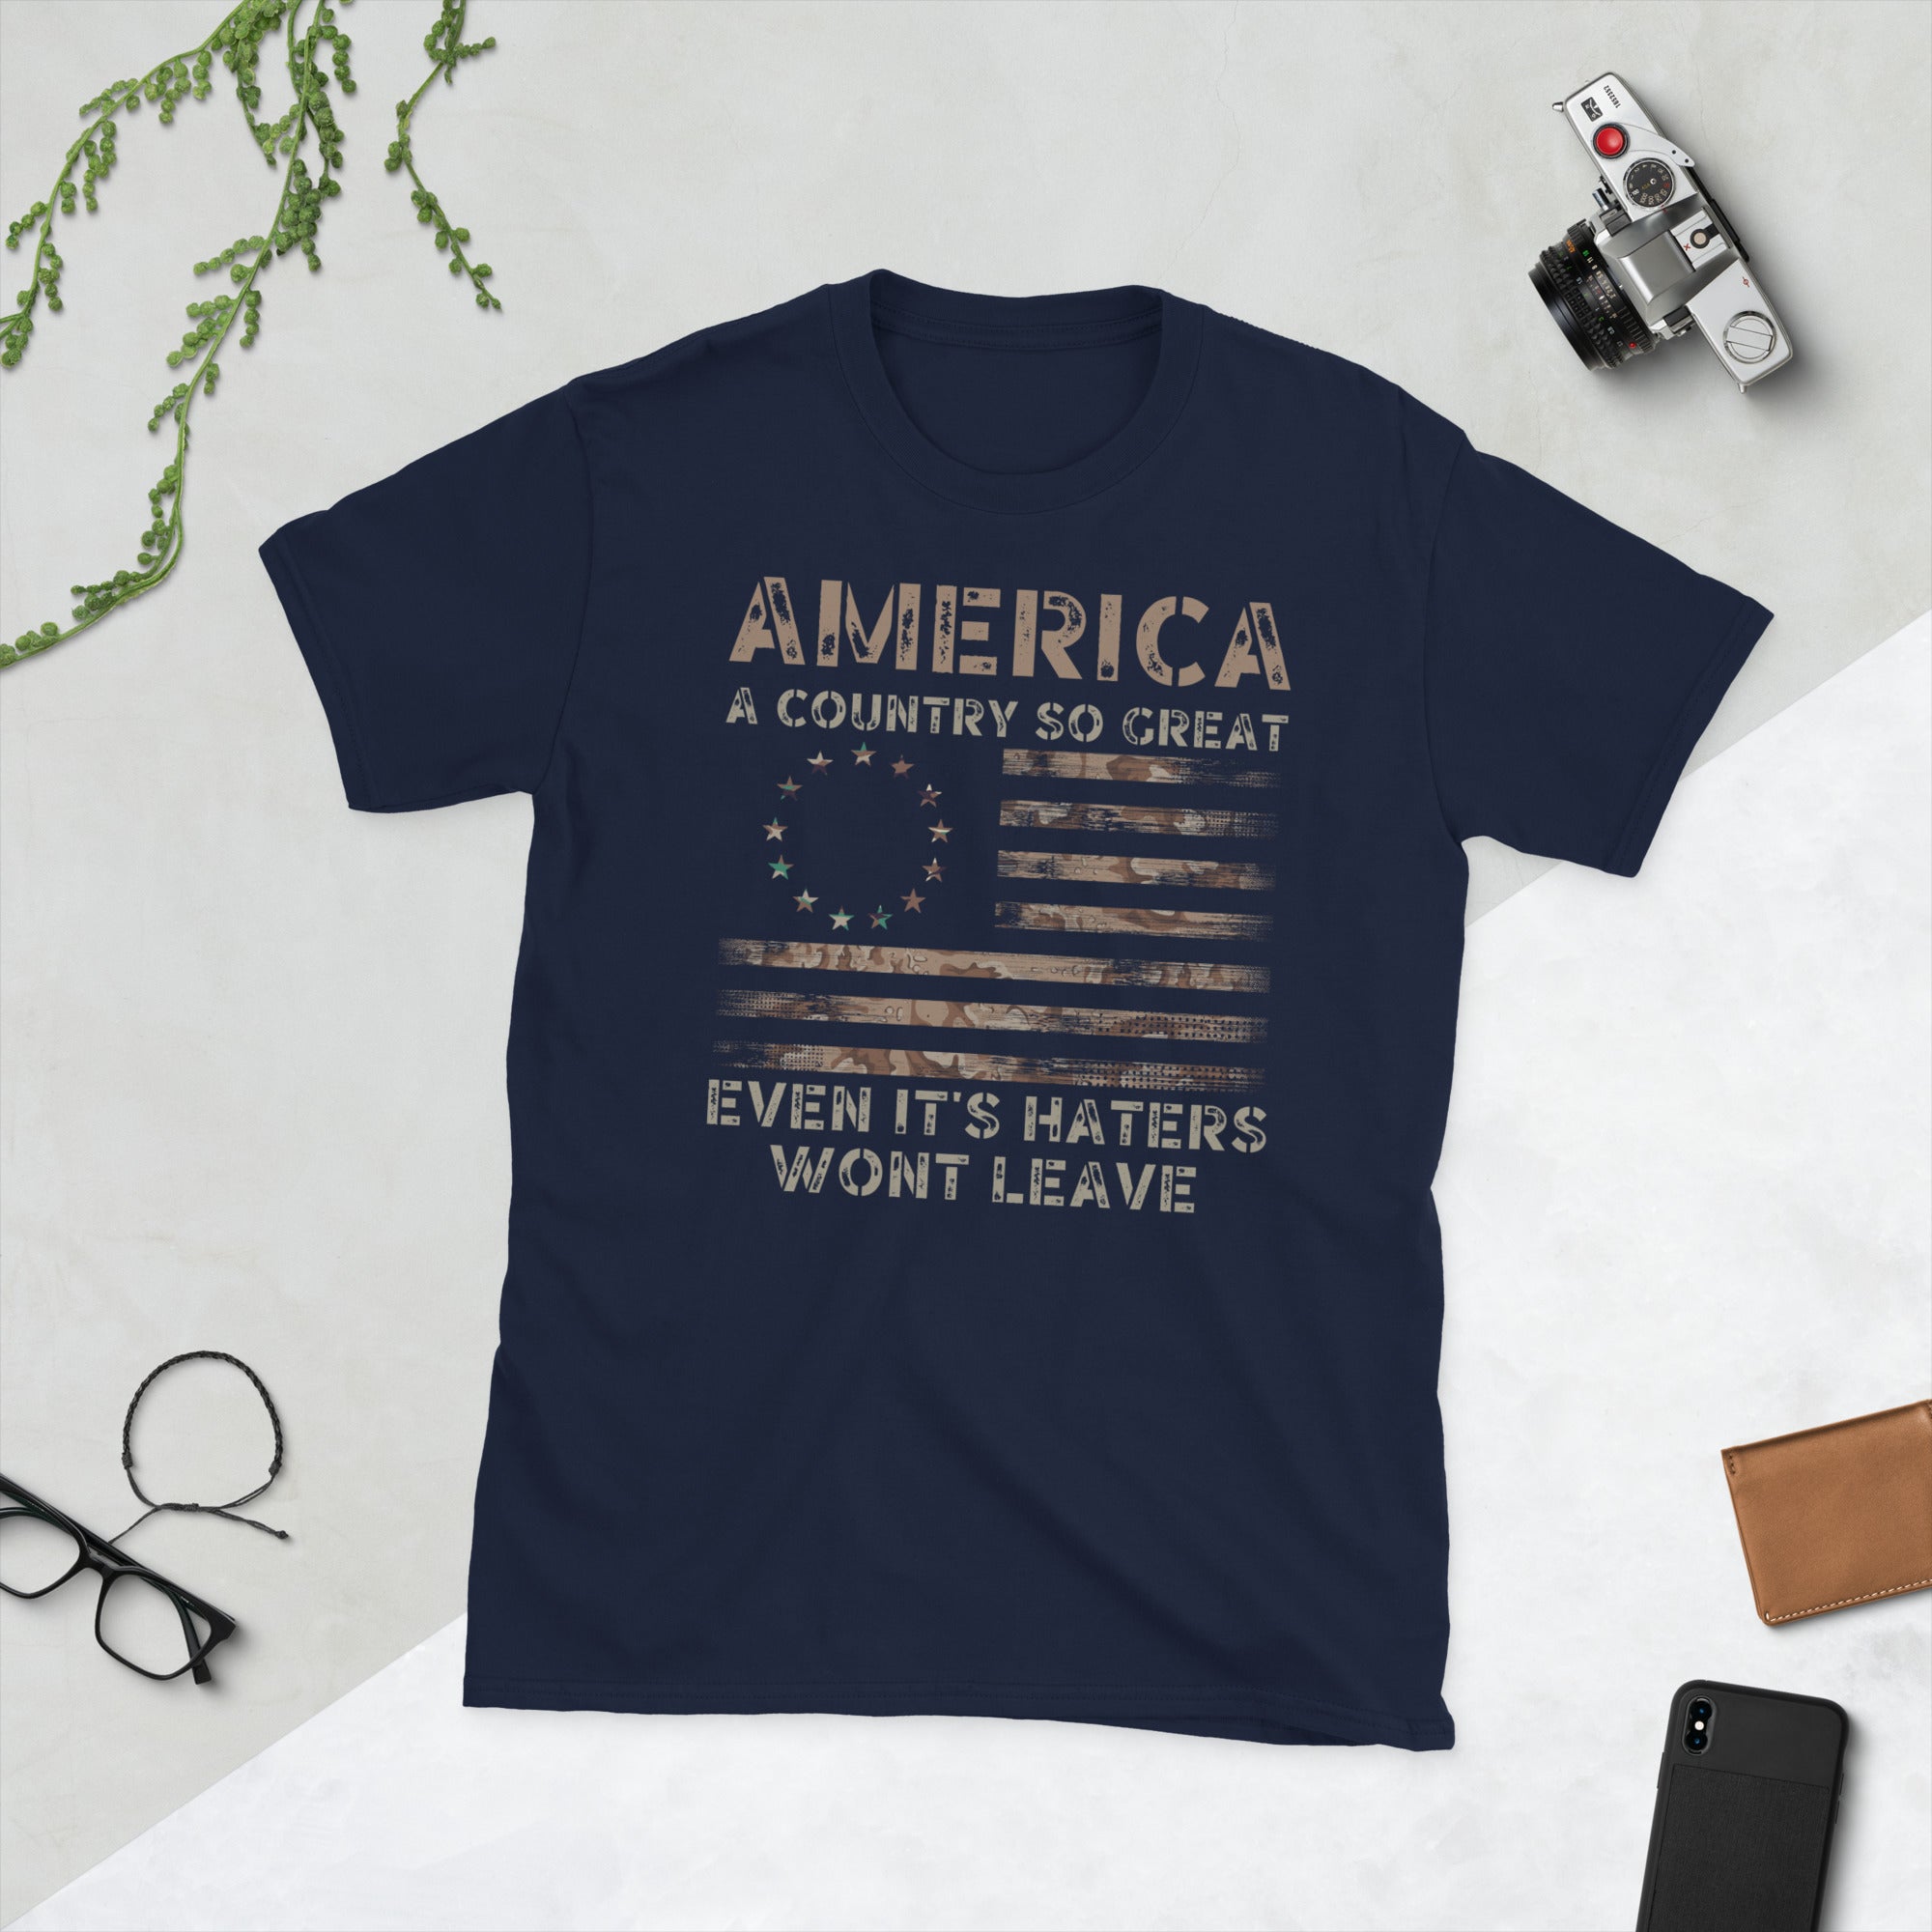 America A Country So Great Even Its Haters Wont Leave Funny 4th Of July Shirt, USA T-Shirt, Girl US Flag Tee, Independence Day, Patriot - Madeinsea©